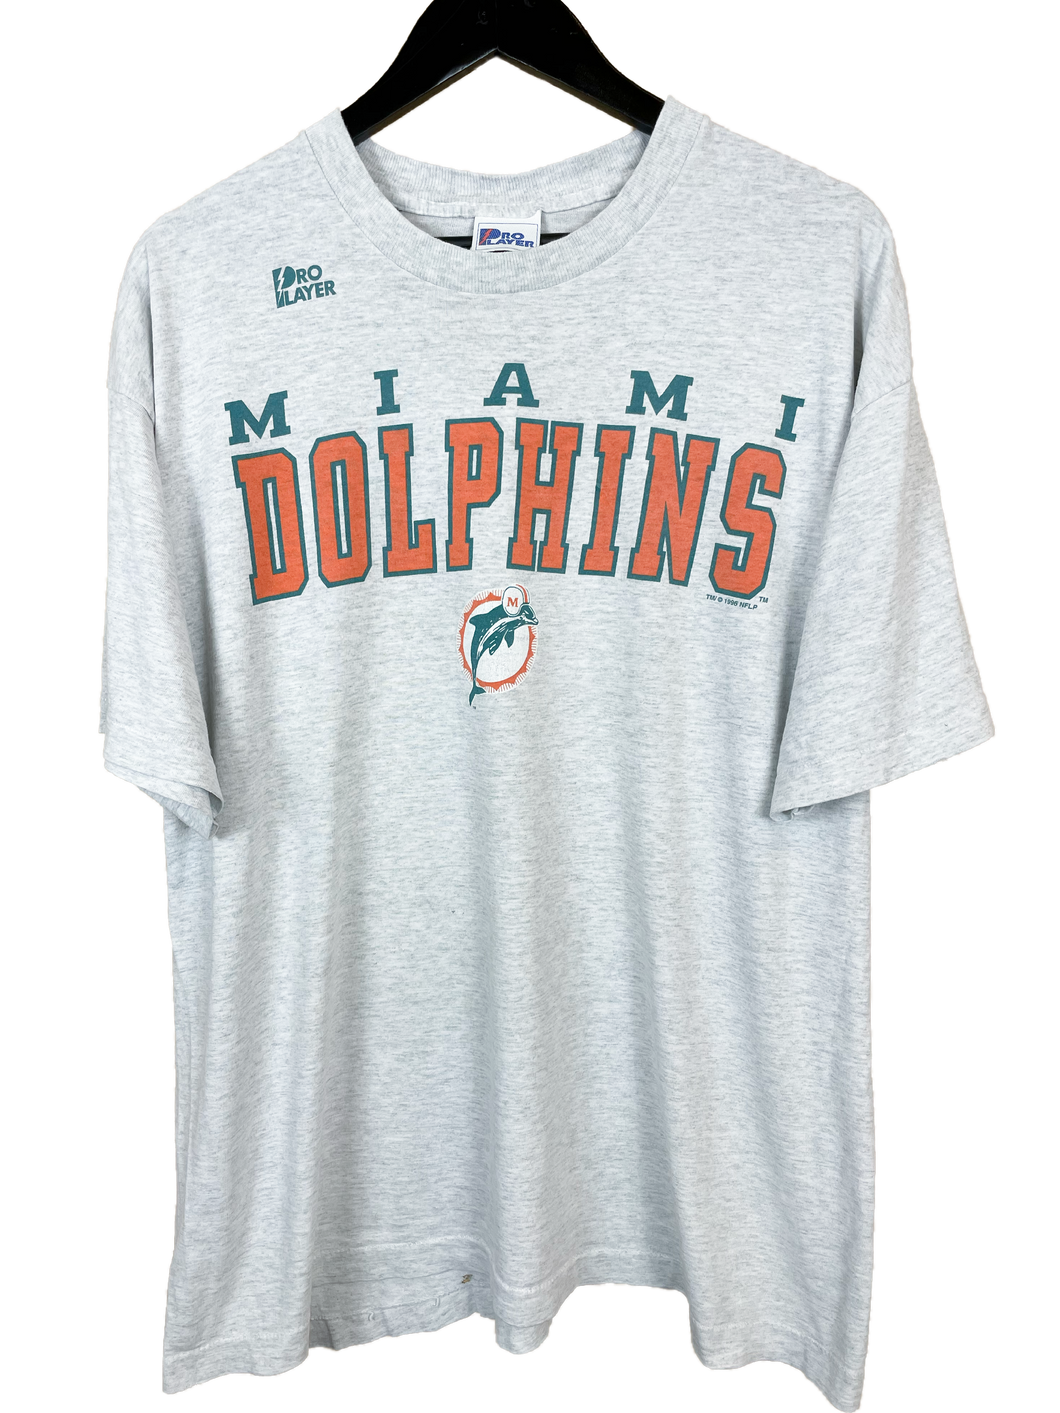 1996 MIAMI DOLPHINS PRO PLAYER ‘SS’ TEE - XL